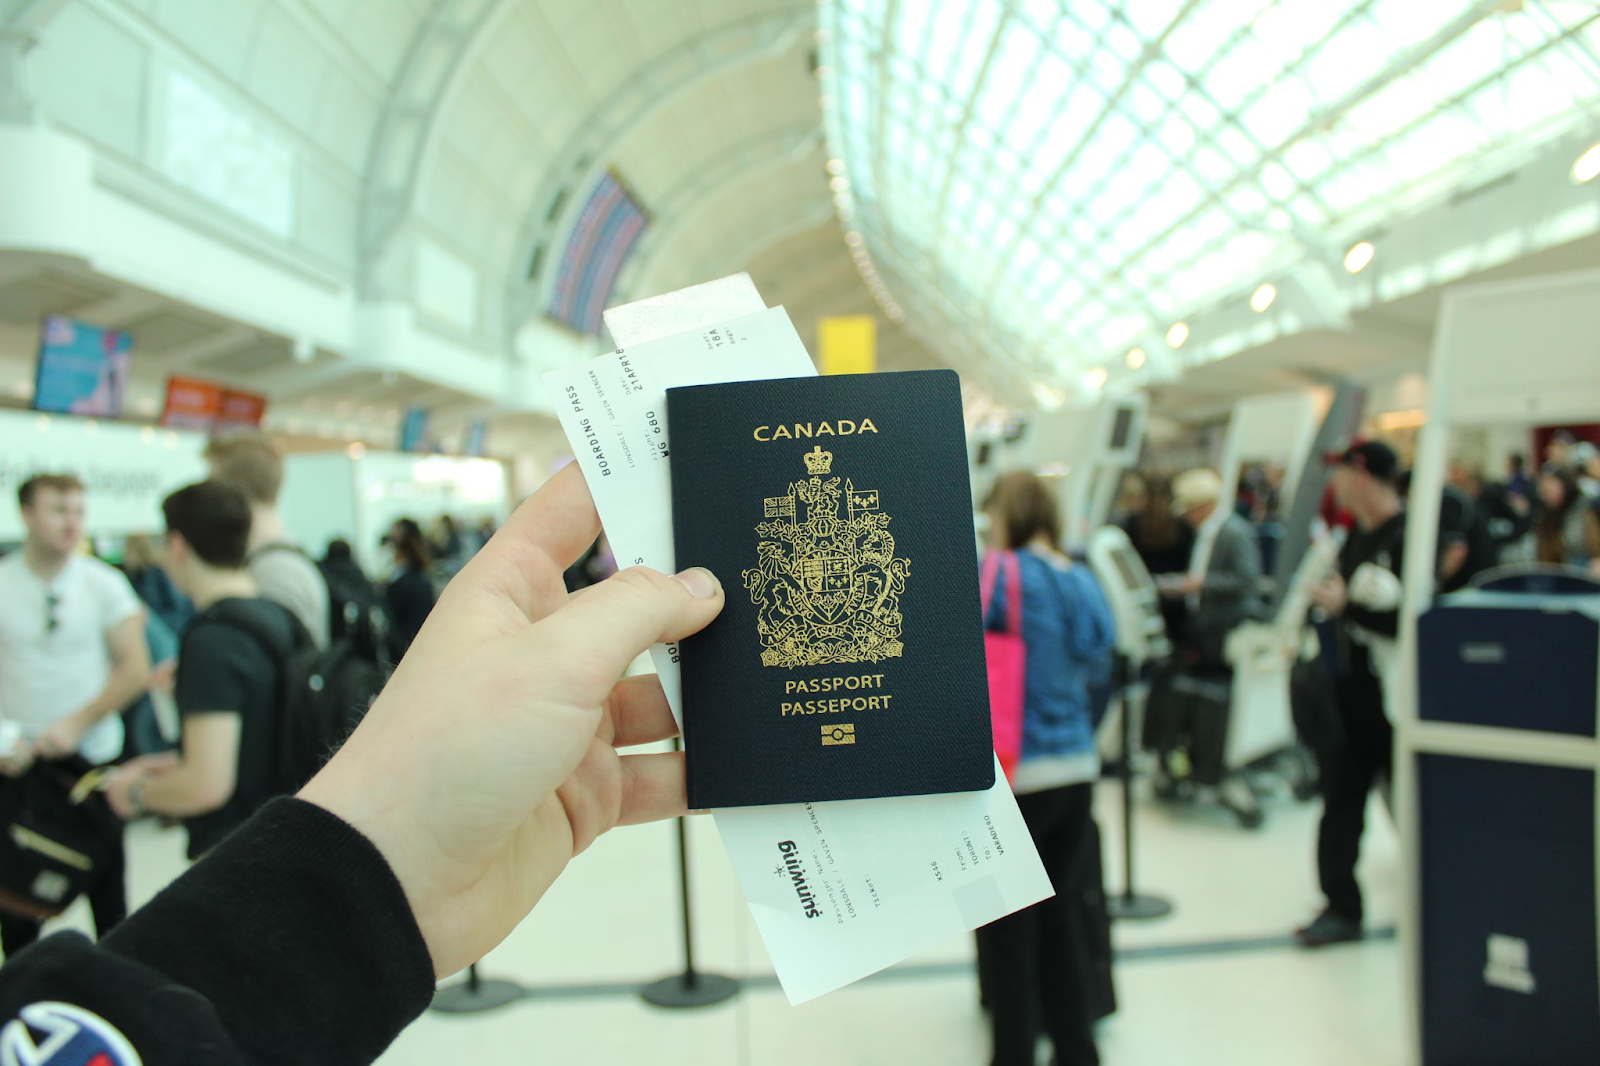 A person holding a Canadian passport and boarding passes at an airport terminal, preparing for international travel.